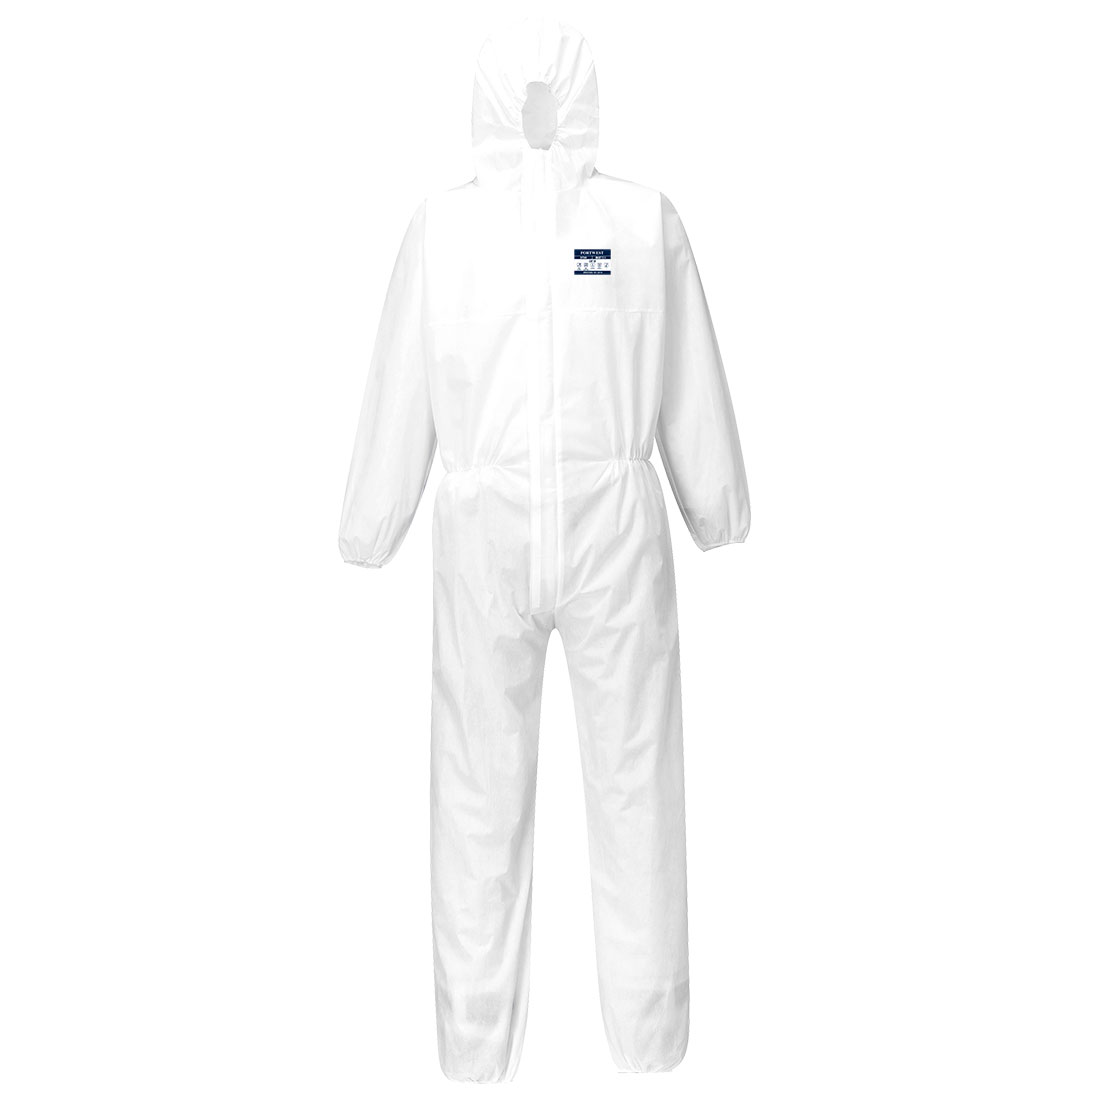 BizTex SMS Coverall Type 5/6 - White - Case of 50